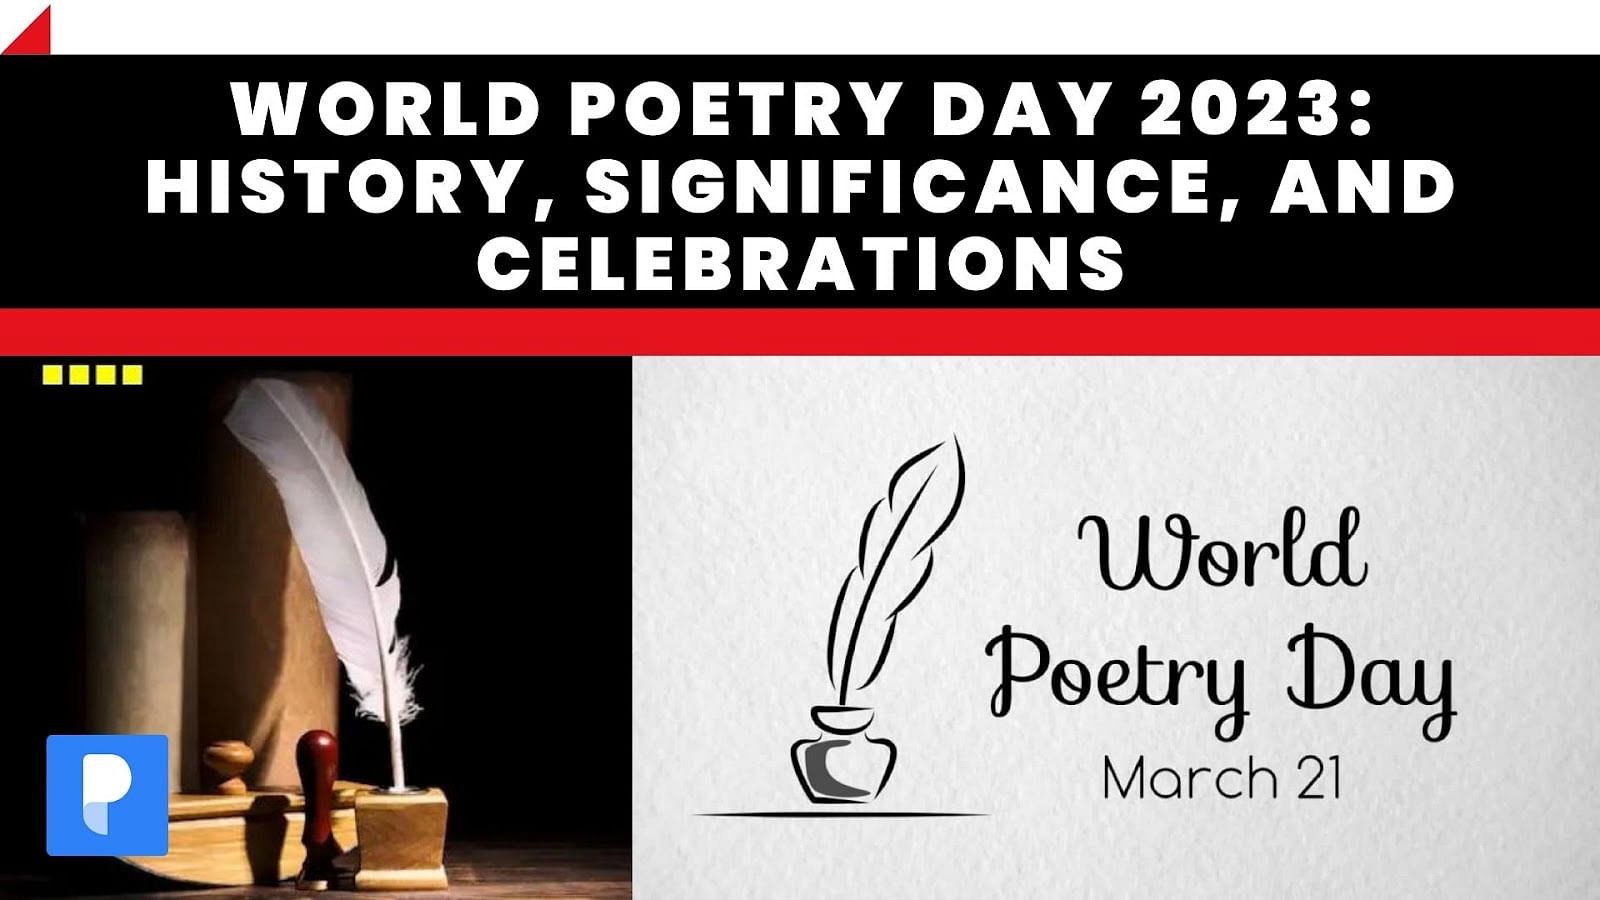 World Poetry Day 2023 History, Significance, and Celebrations